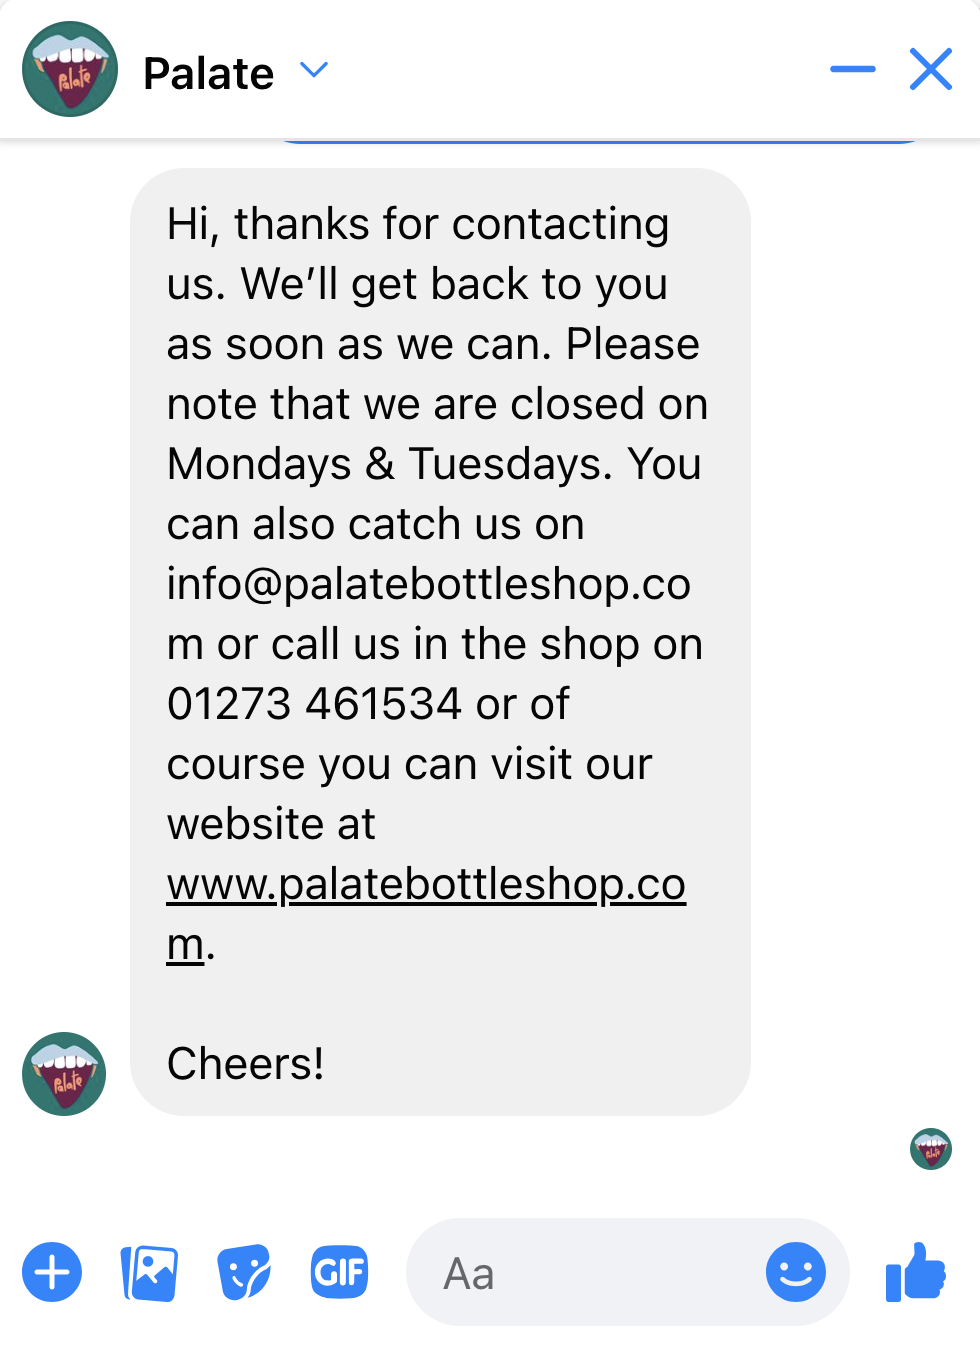 Palate's automated reply to customers on Facebook Messenger